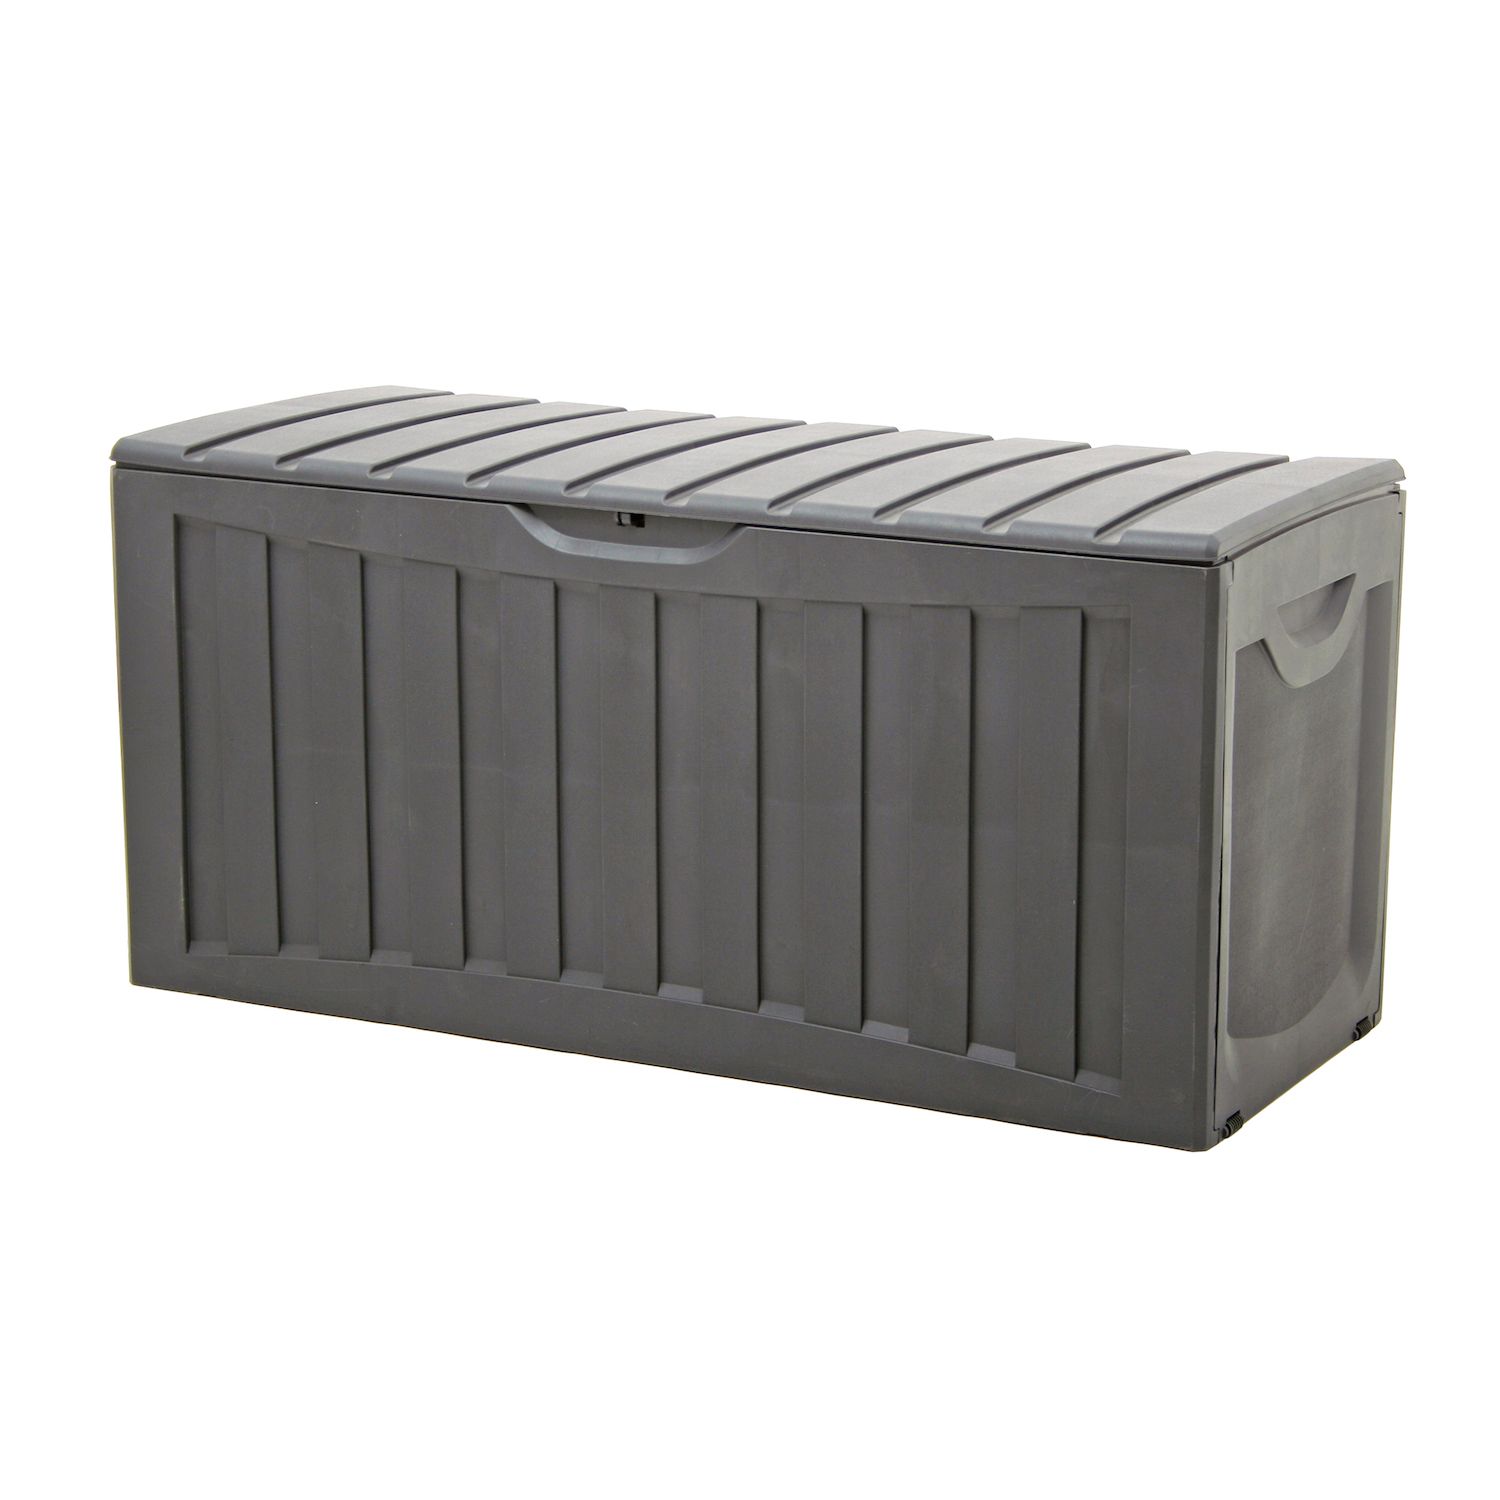 Fcmp Outdoor Sb120-gry-s Large 26 Gallon Outdoor Utility Storage